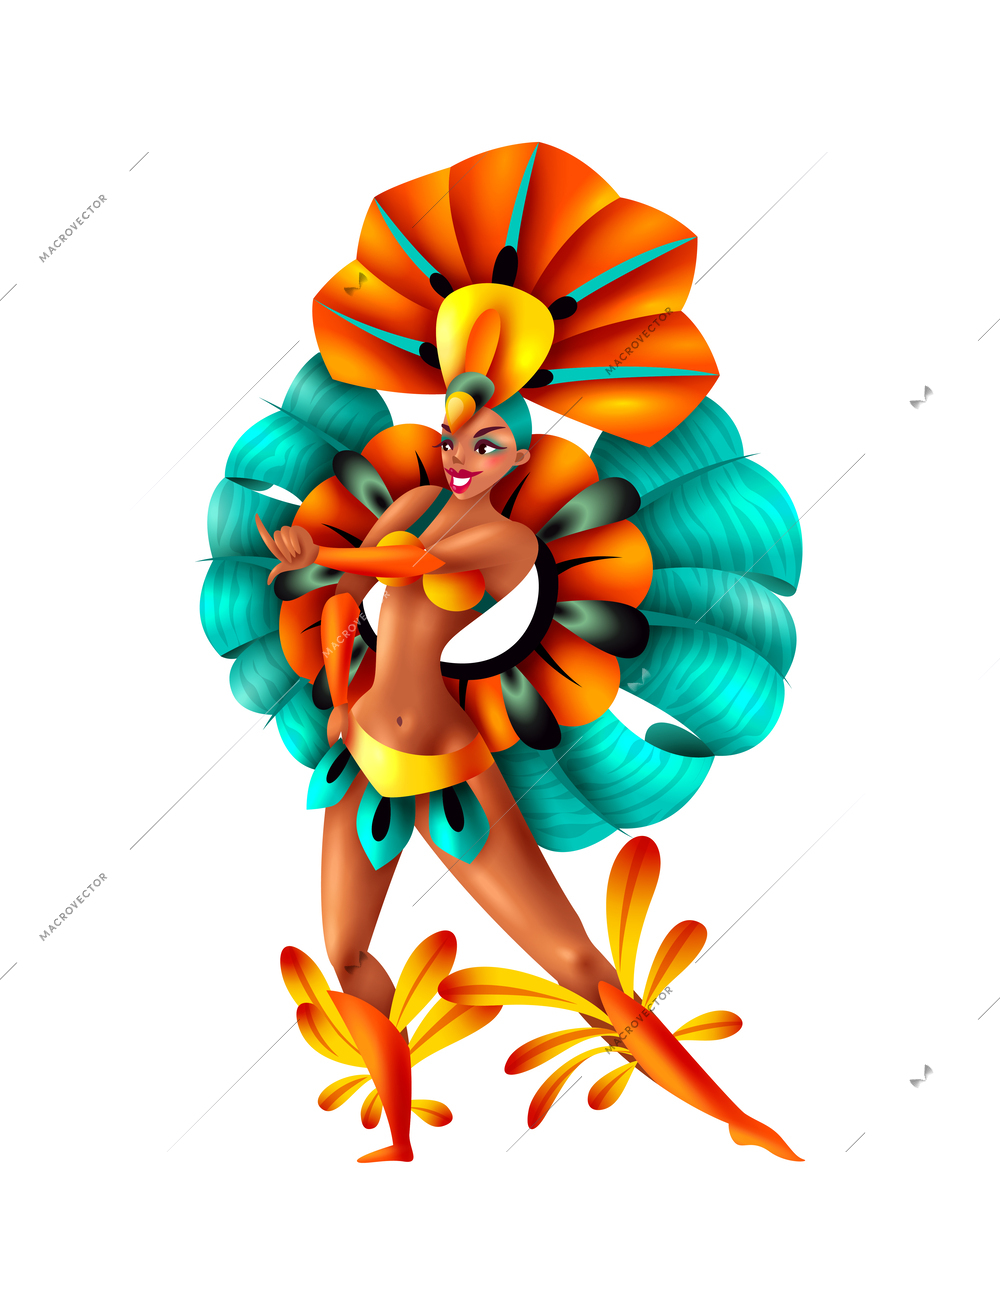 Realistic brazilian woman wearing colorful traditional costume dancing at carnival vector illustration